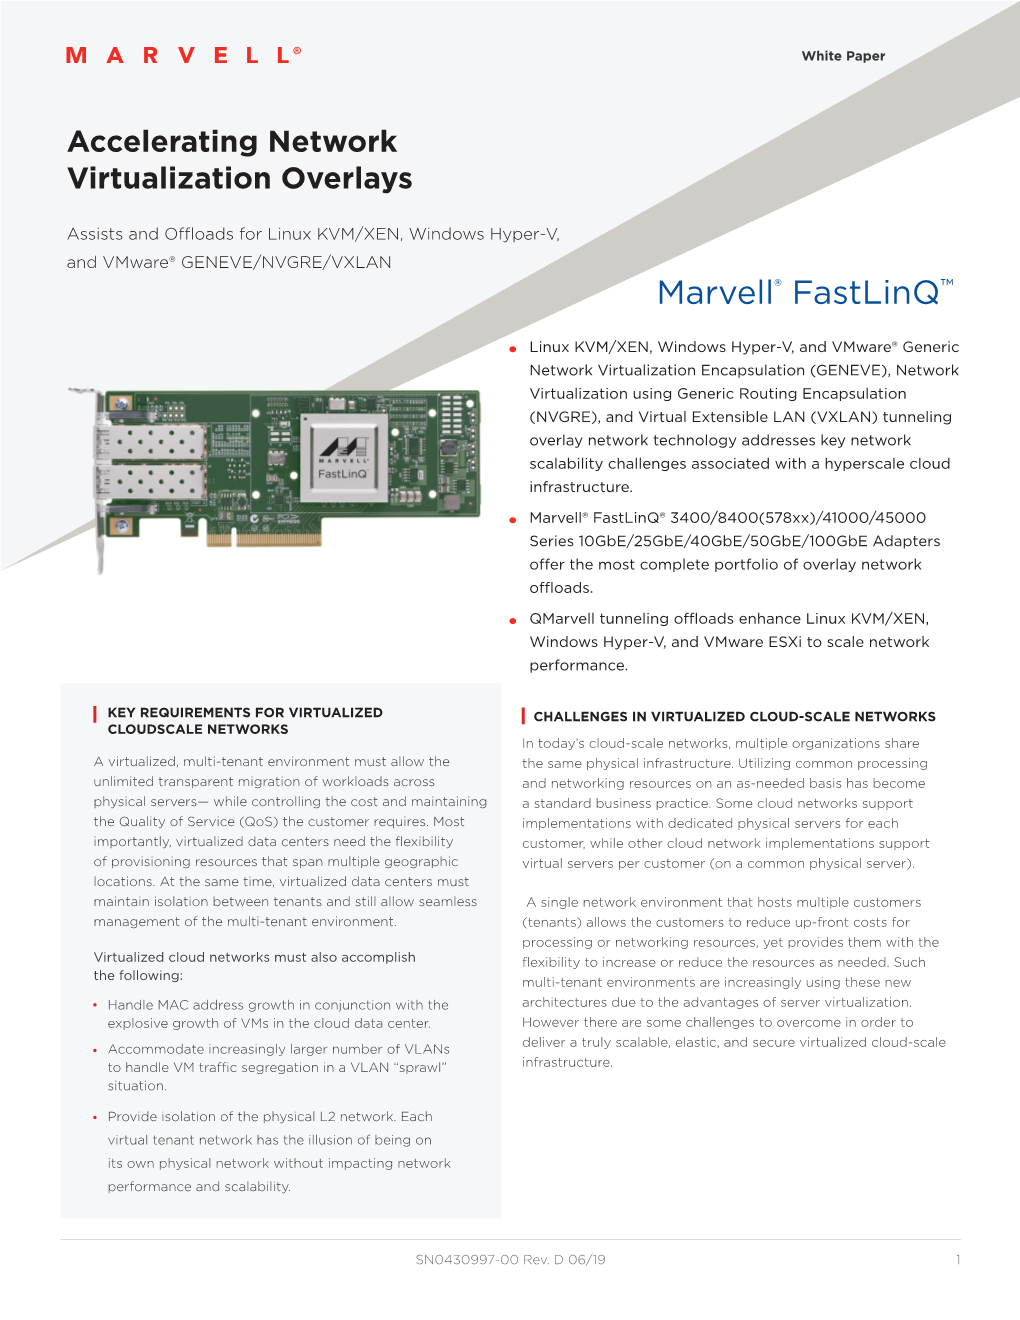 Accelerating Network Virtualization Overlays White Paper